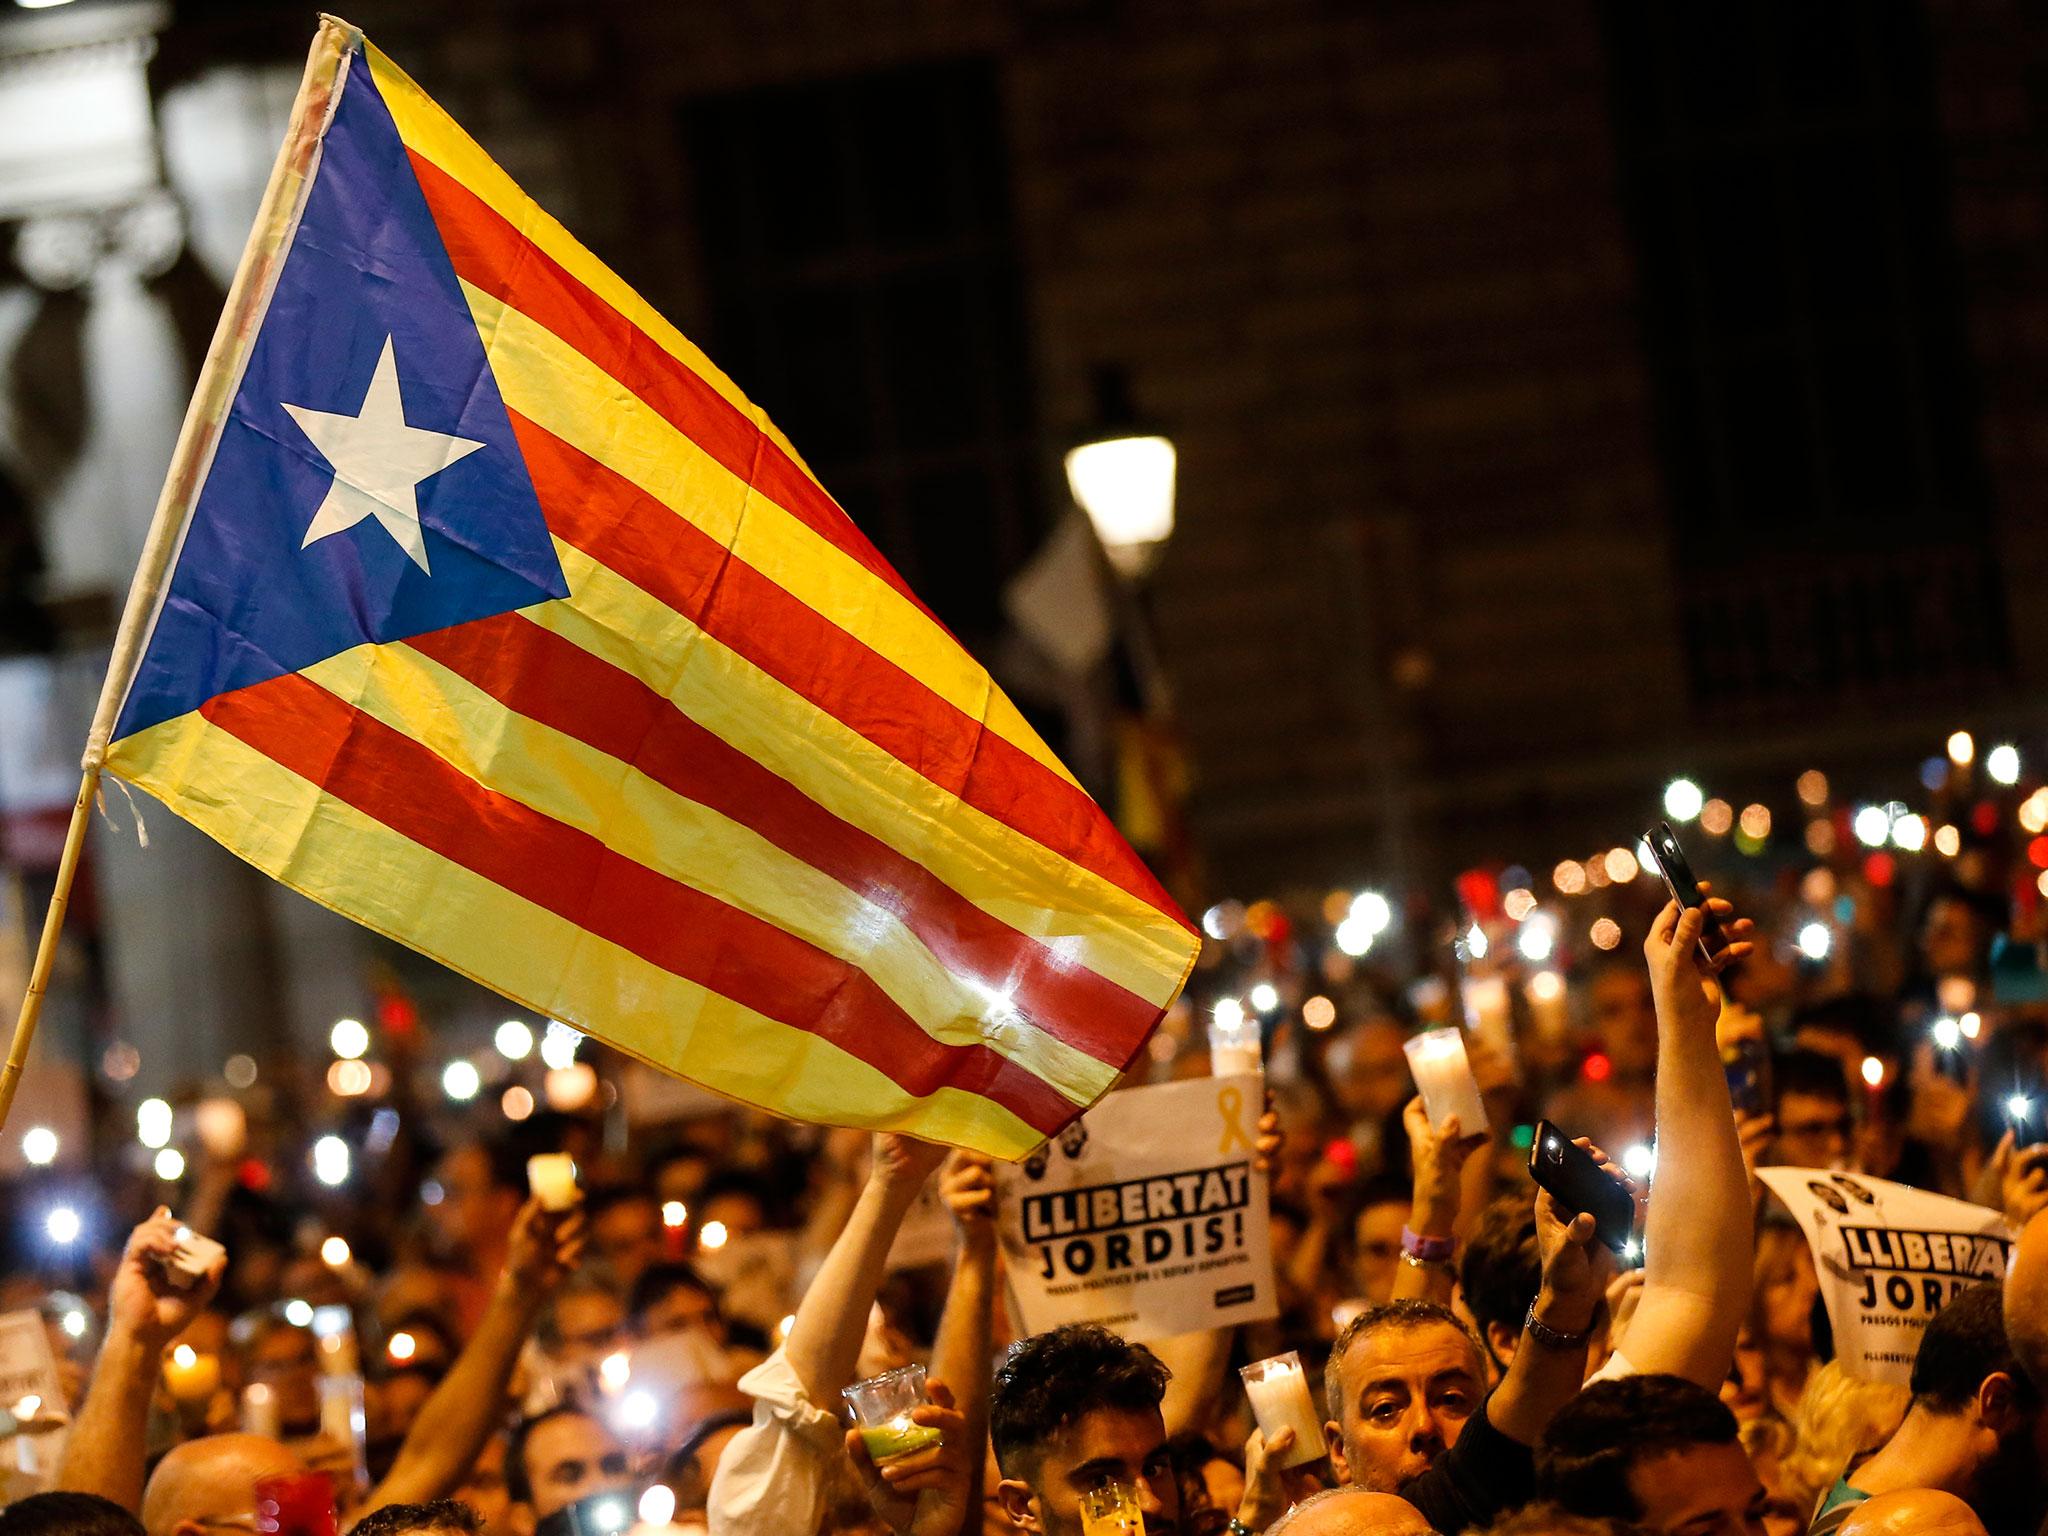 People hold candles and a Catalan pro-independence 'Estelada' flag during a demonstration in Barcelona against the arrest of two Catalan separatist leaders